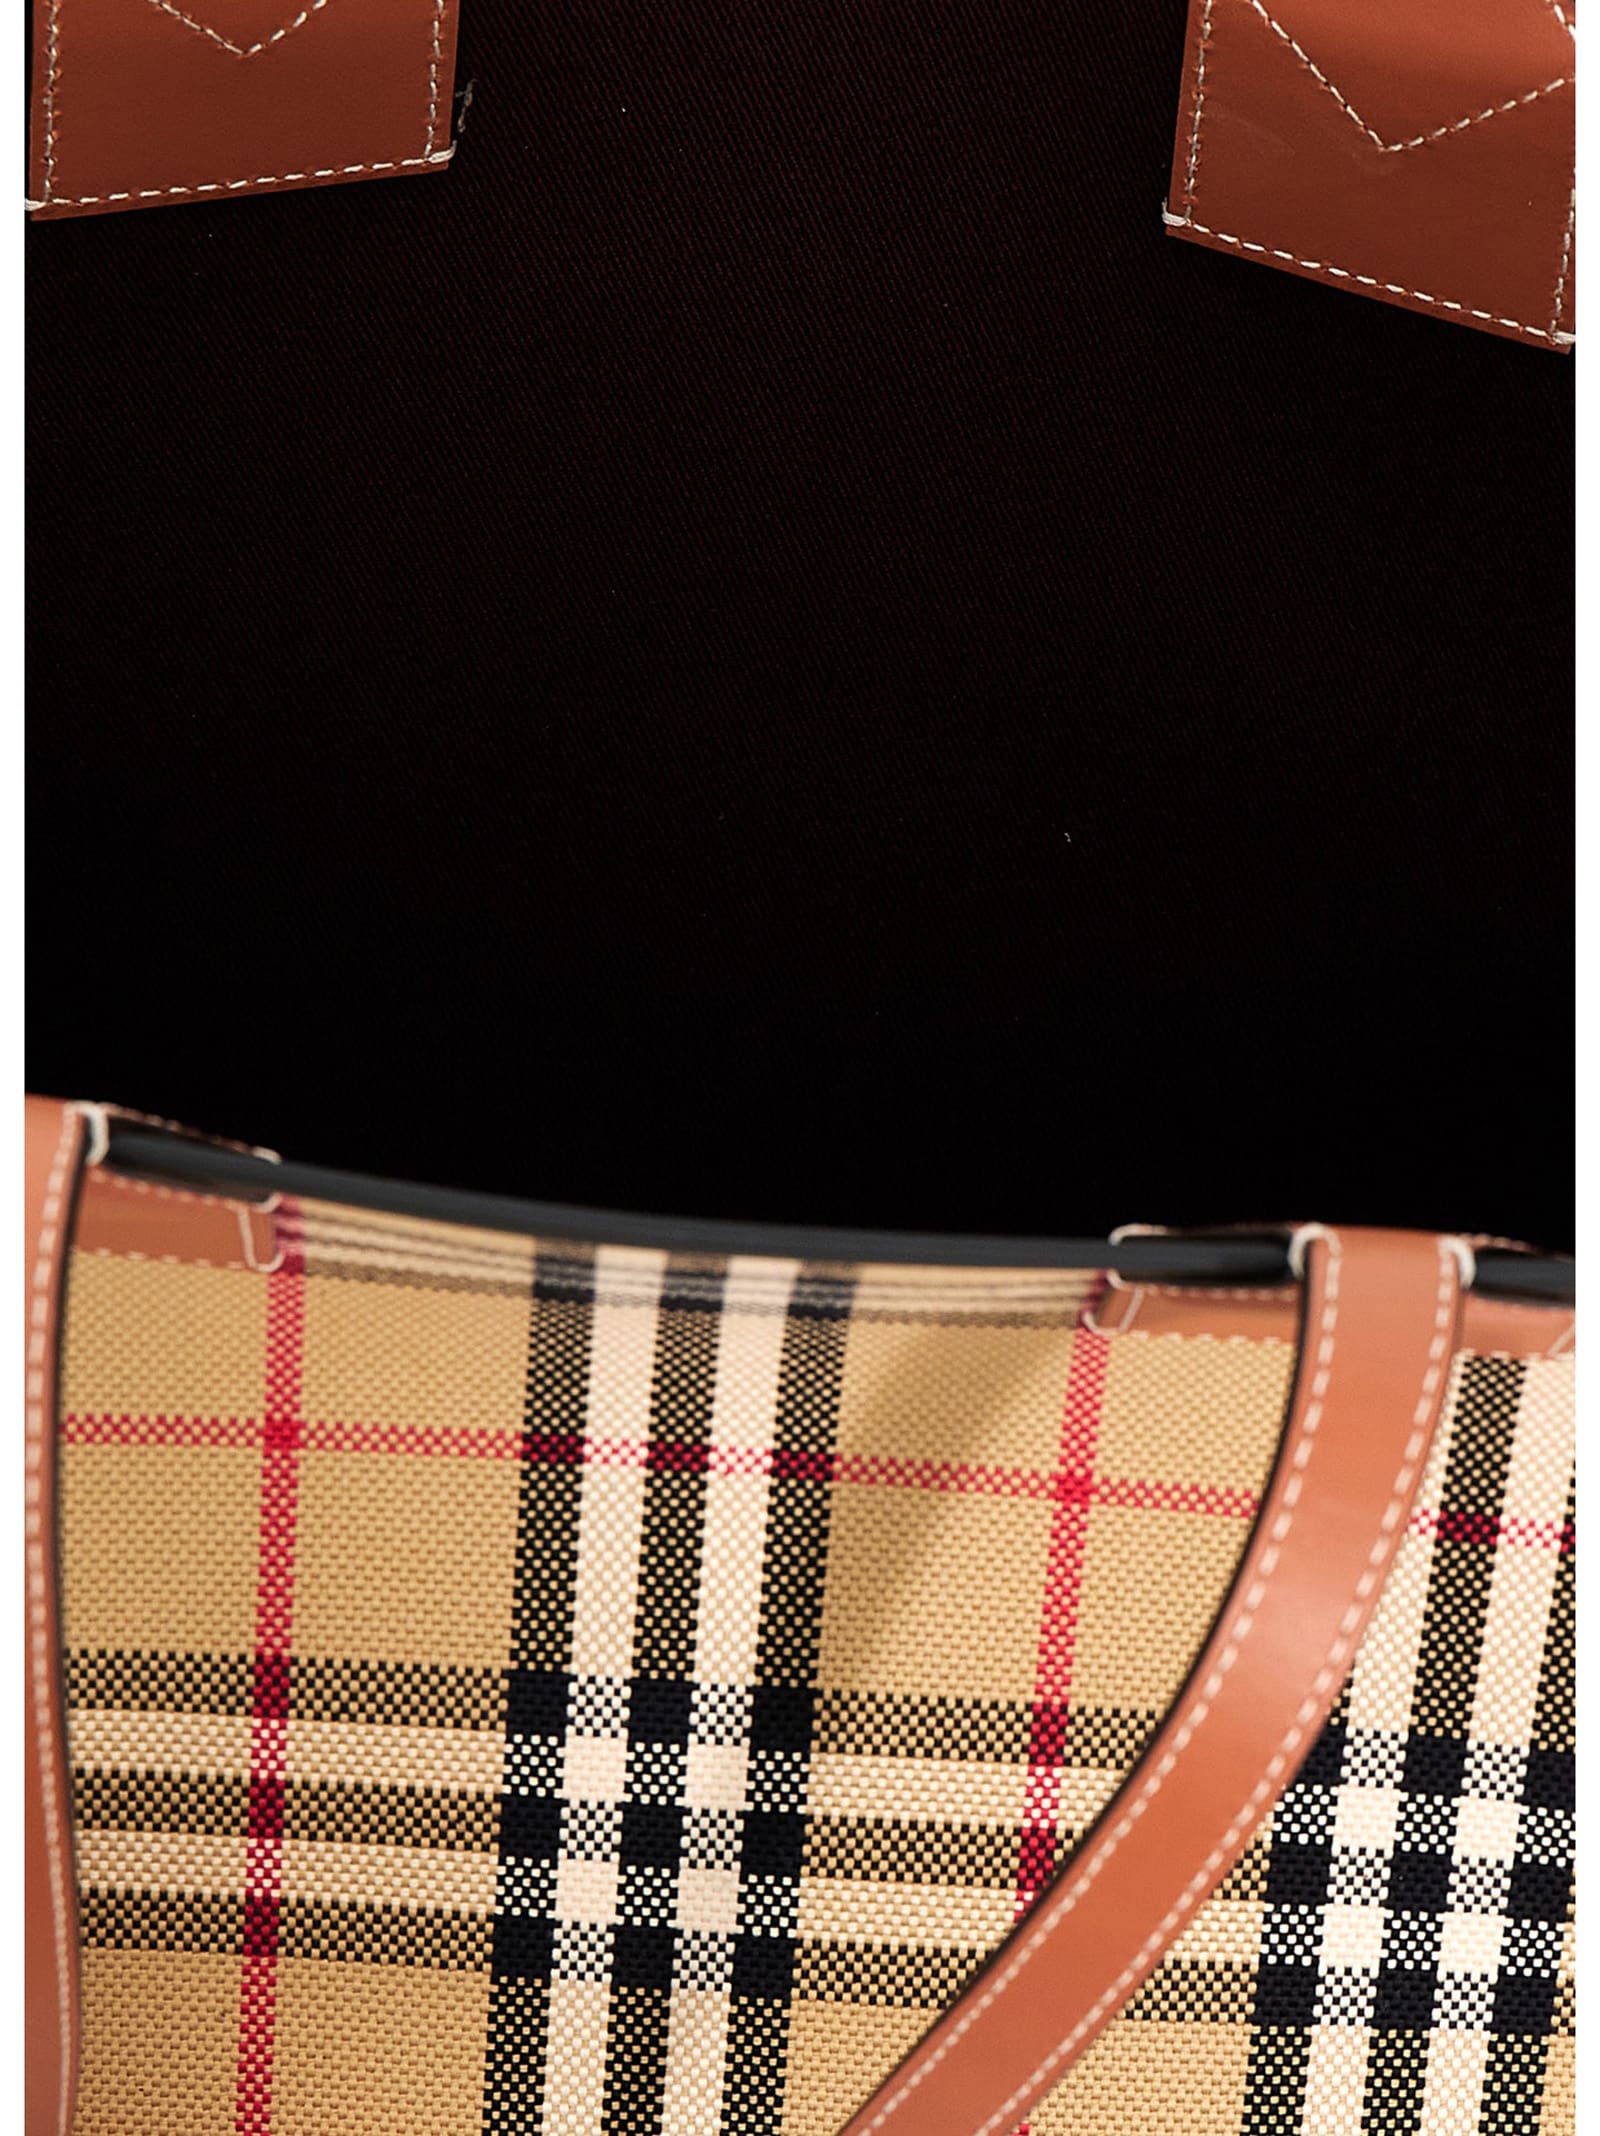 Shop Burberry London Shopping Bag In Brown